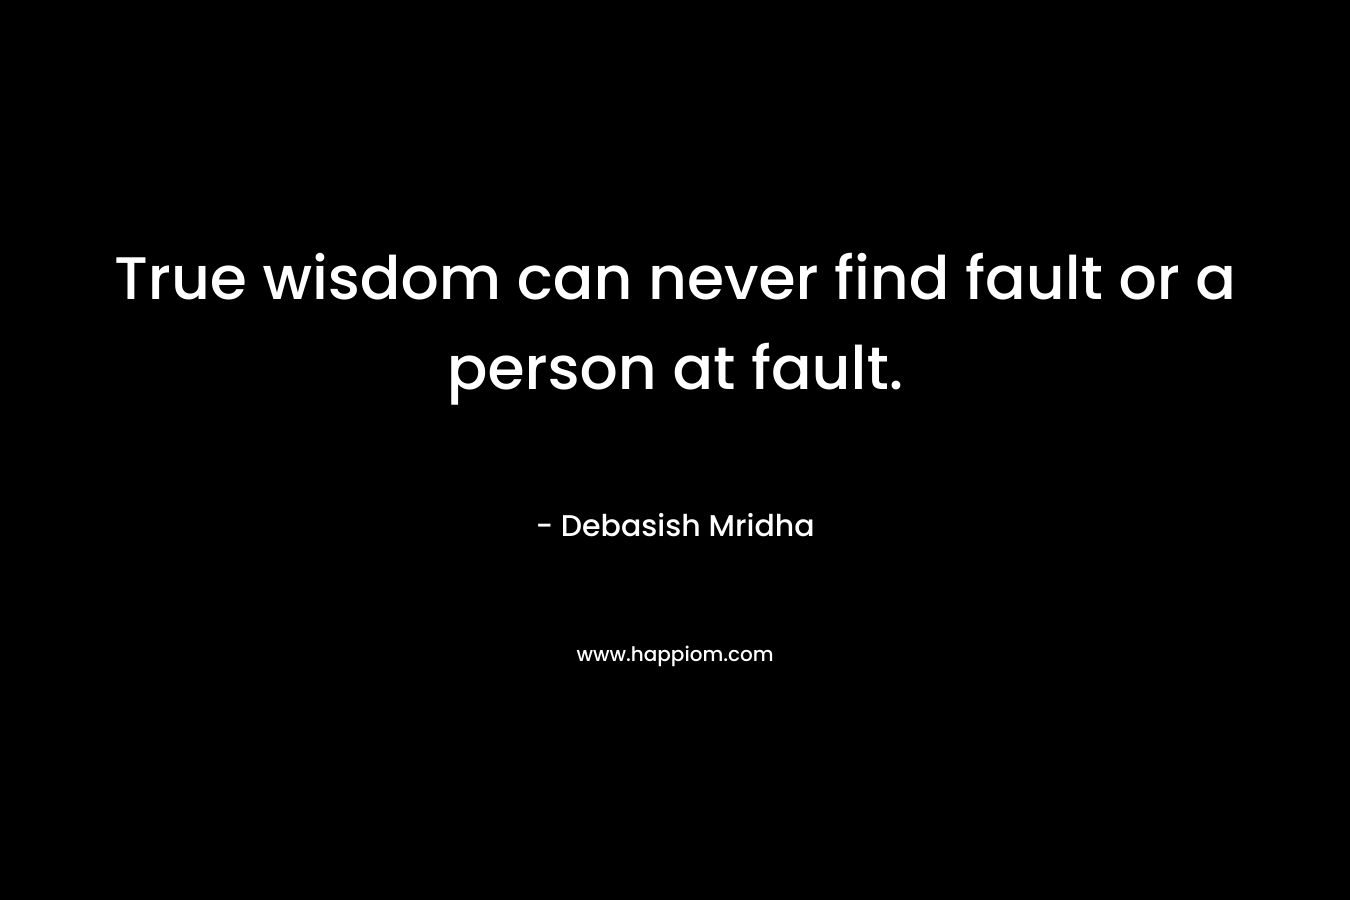 True wisdom can never find fault or a person at fault.